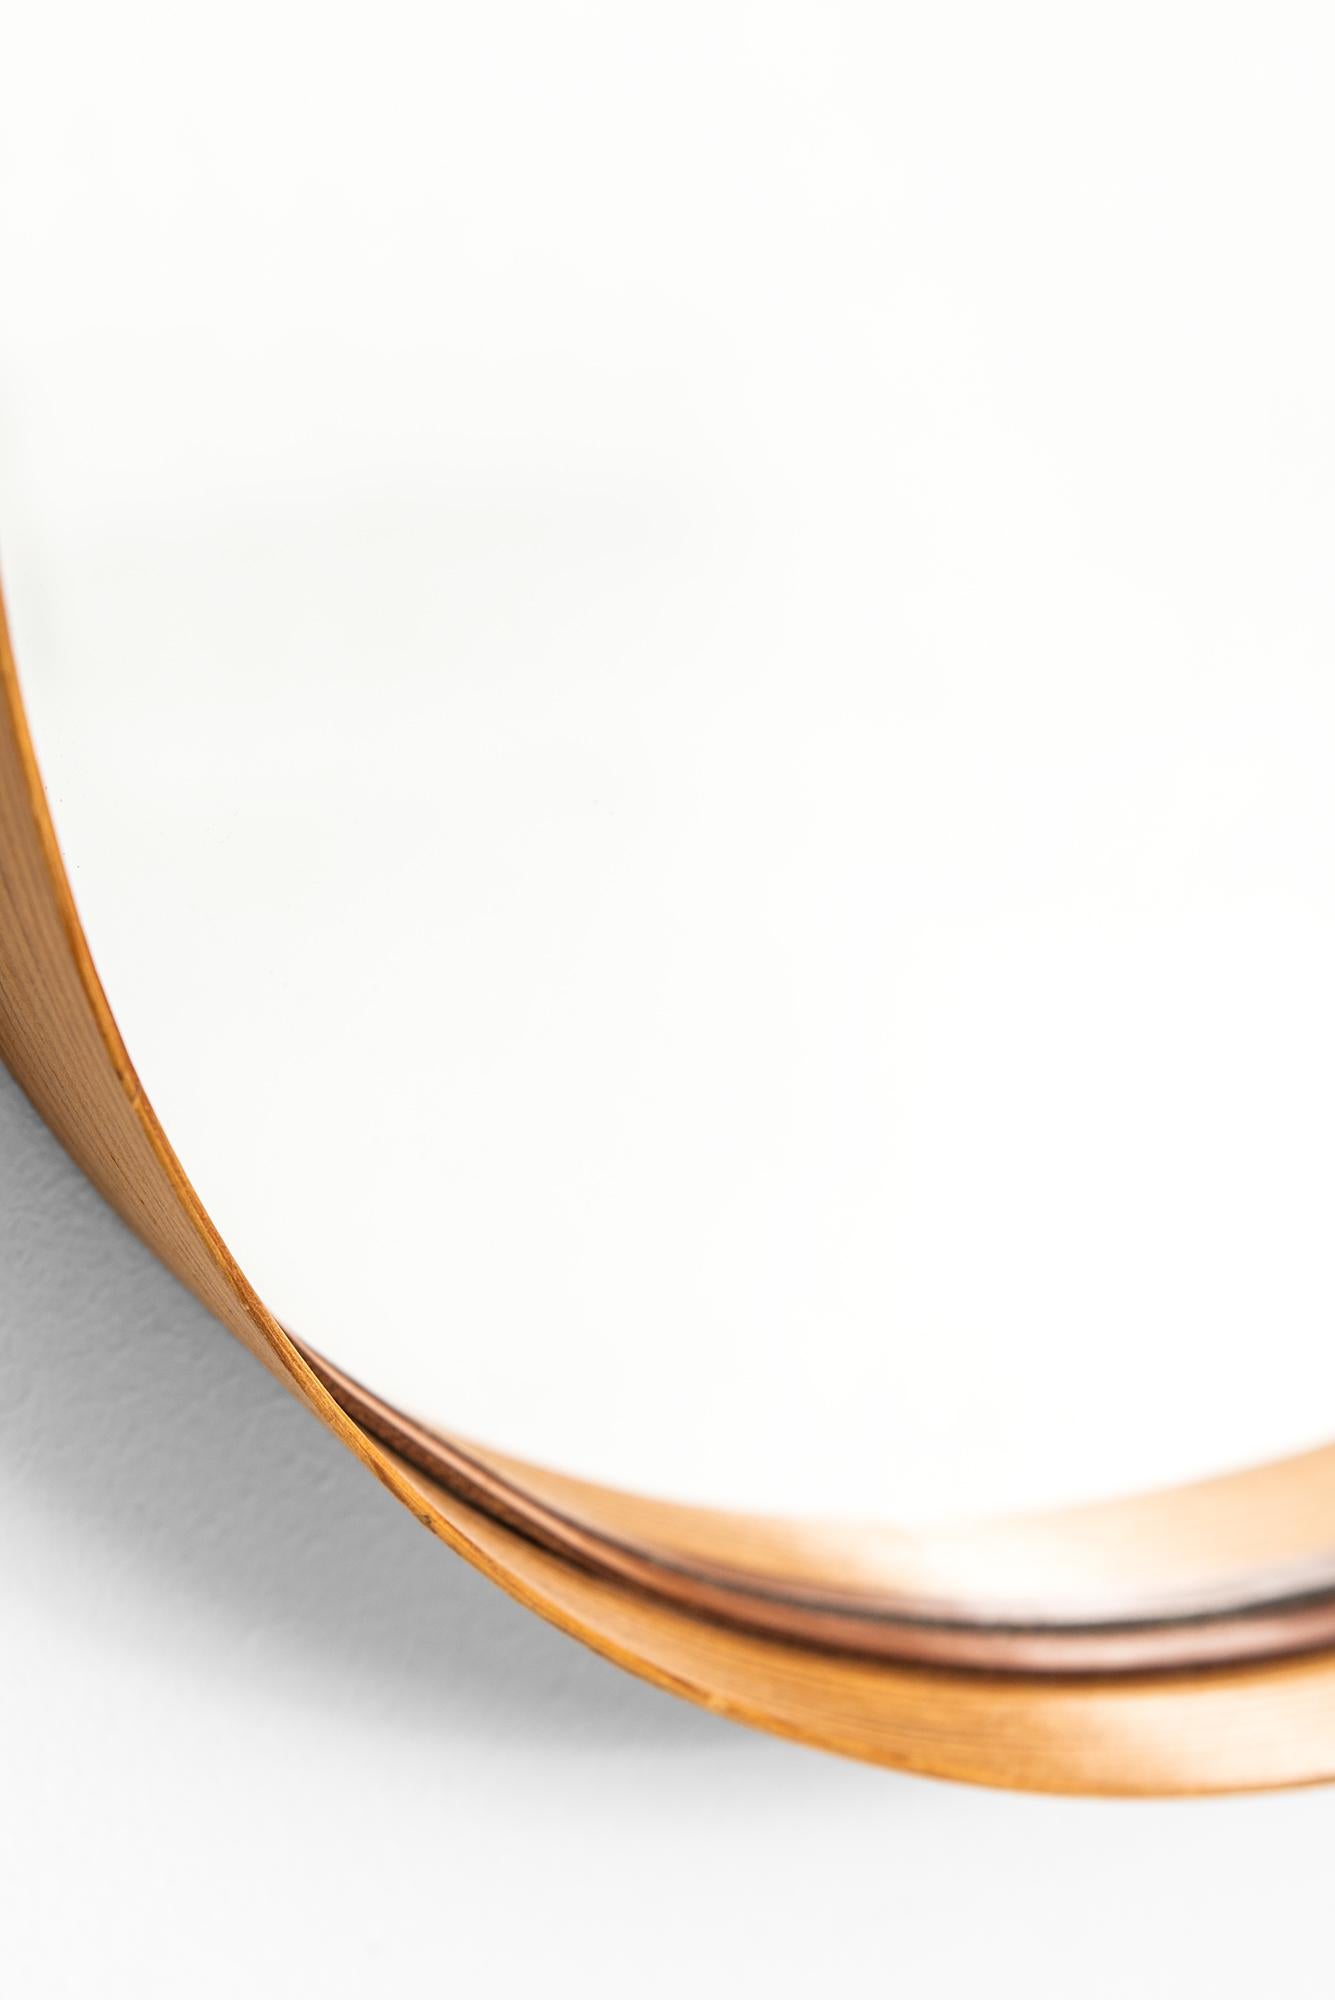 Rare mirror in pine, brass and leather. Produced by Glas mäster in Markaryd, Sweden.